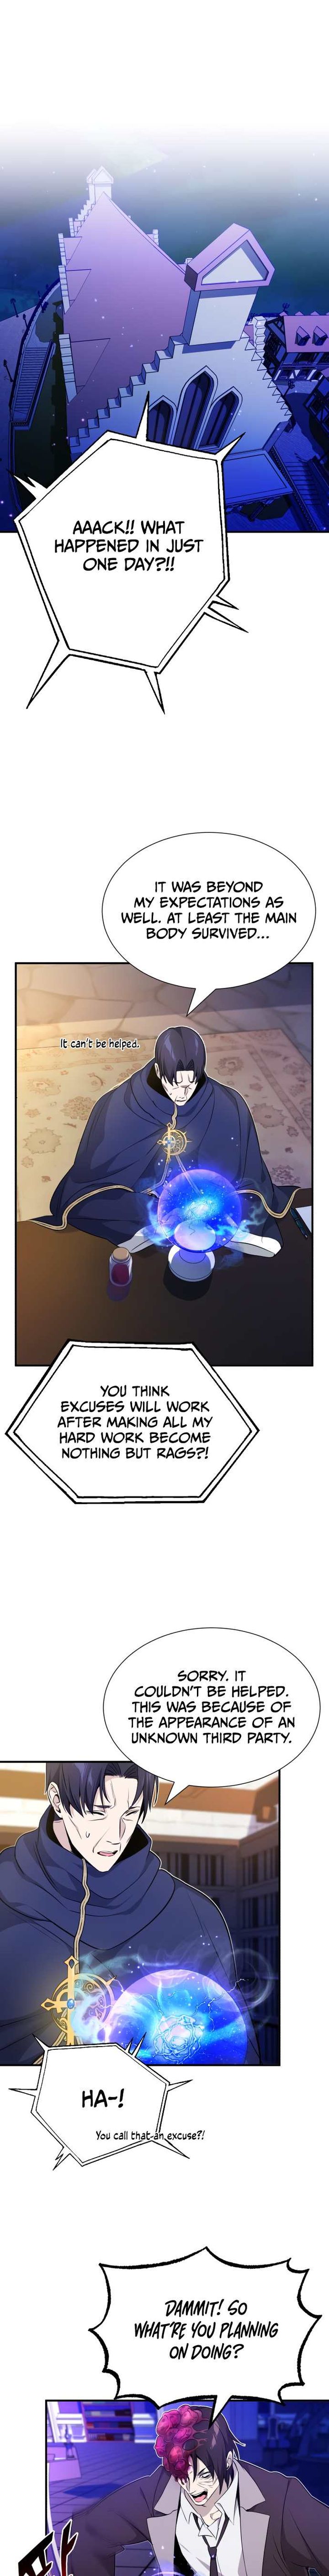 the_dark_magician_transmigrates_after_66666_years_21_20